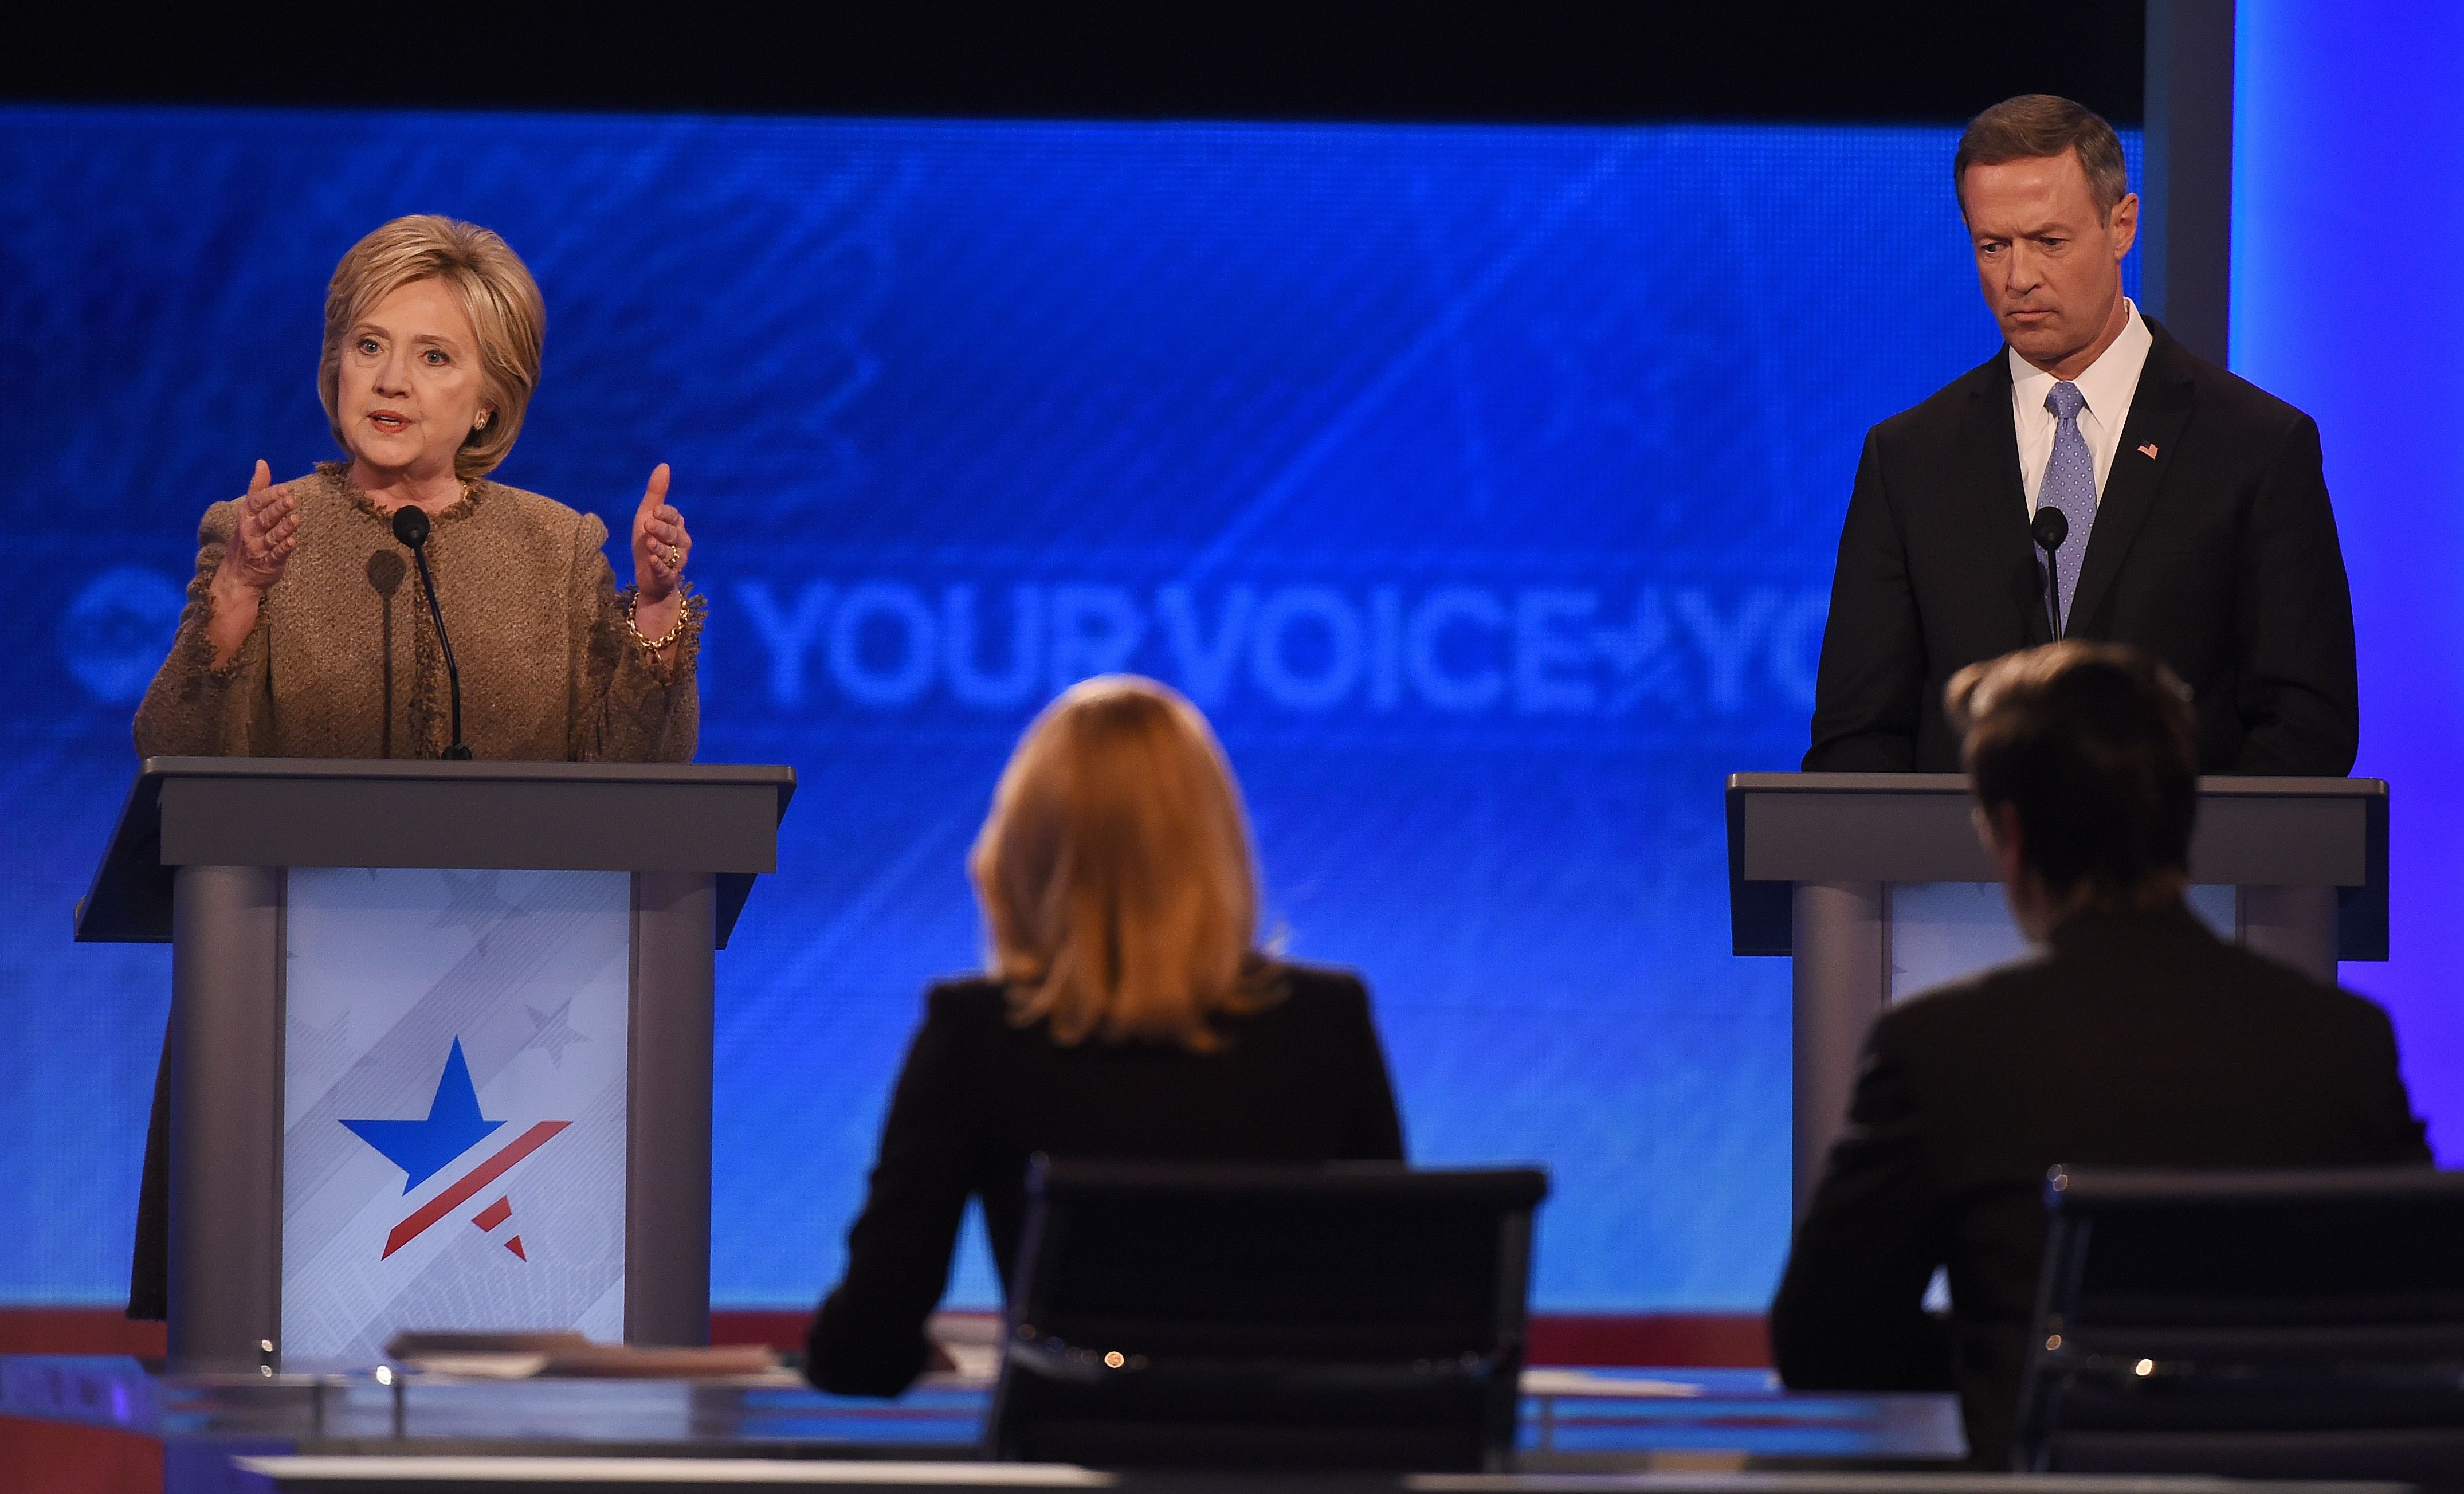 Hillary Clinton, left, speaks as fellow candidate Martin O'Malley listens during the Democratic Presidential Debate hosted by ABC News at Saint Anselm College in Manchester, New Hampshire, on Dec. 19, 2015. (Jewel Samad—AFP/Getty Images)